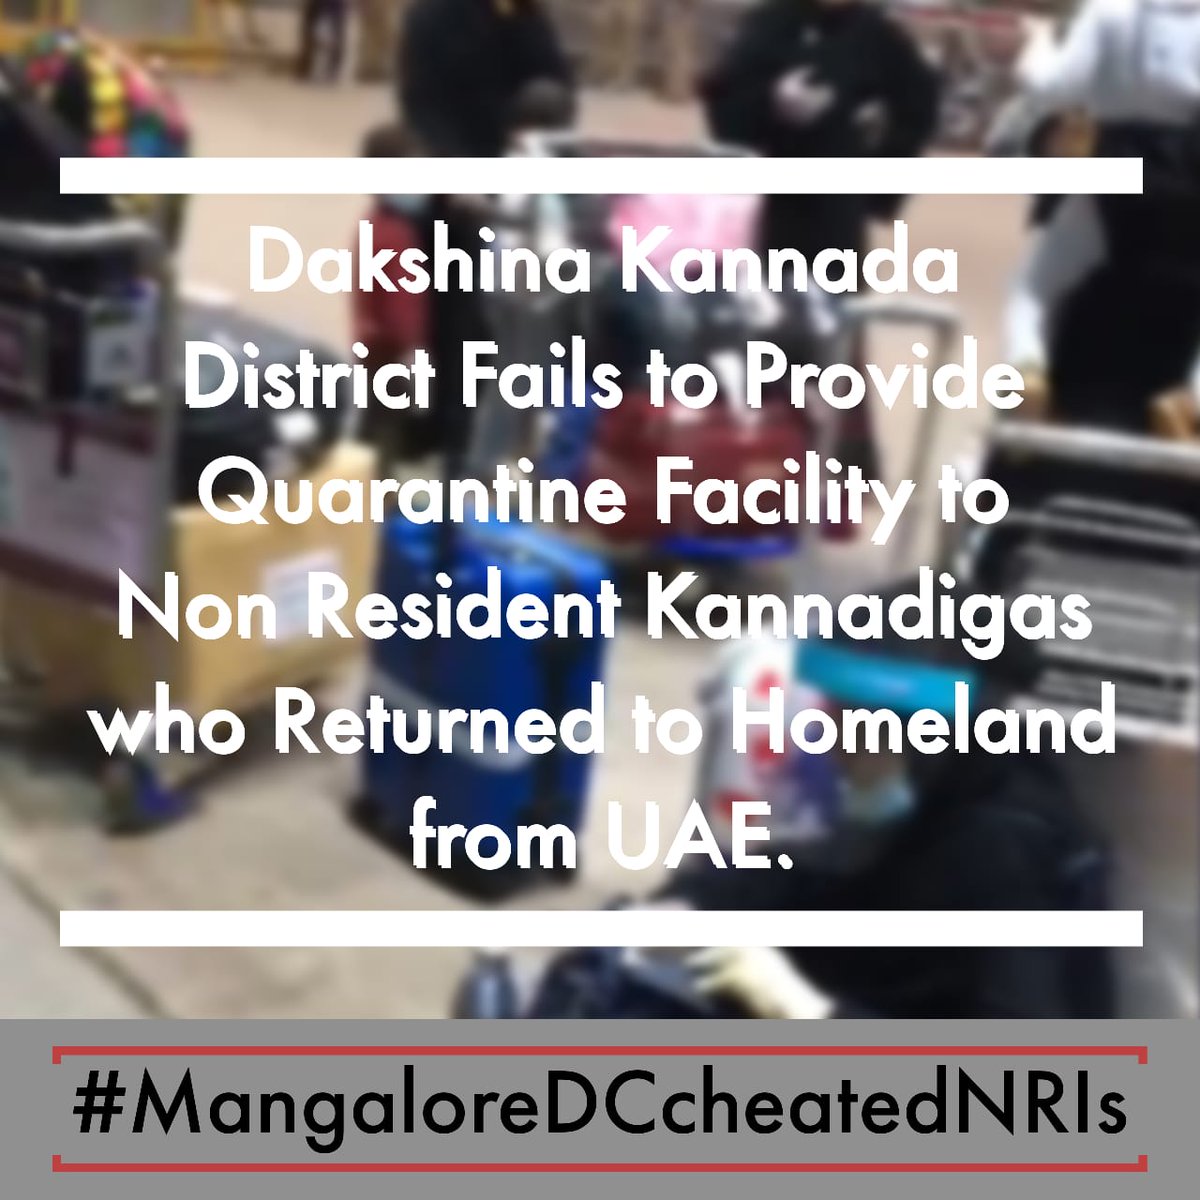 Thread on  #MangaloreDCcheatedNRIsDistrict administration  @DCDK9 of Dakshina kannada utterly failed to treat the expatriates fairly, who returned from dubai yesterday. It is pathetic that the officials themselves were harrasing the expatriates. 1/n